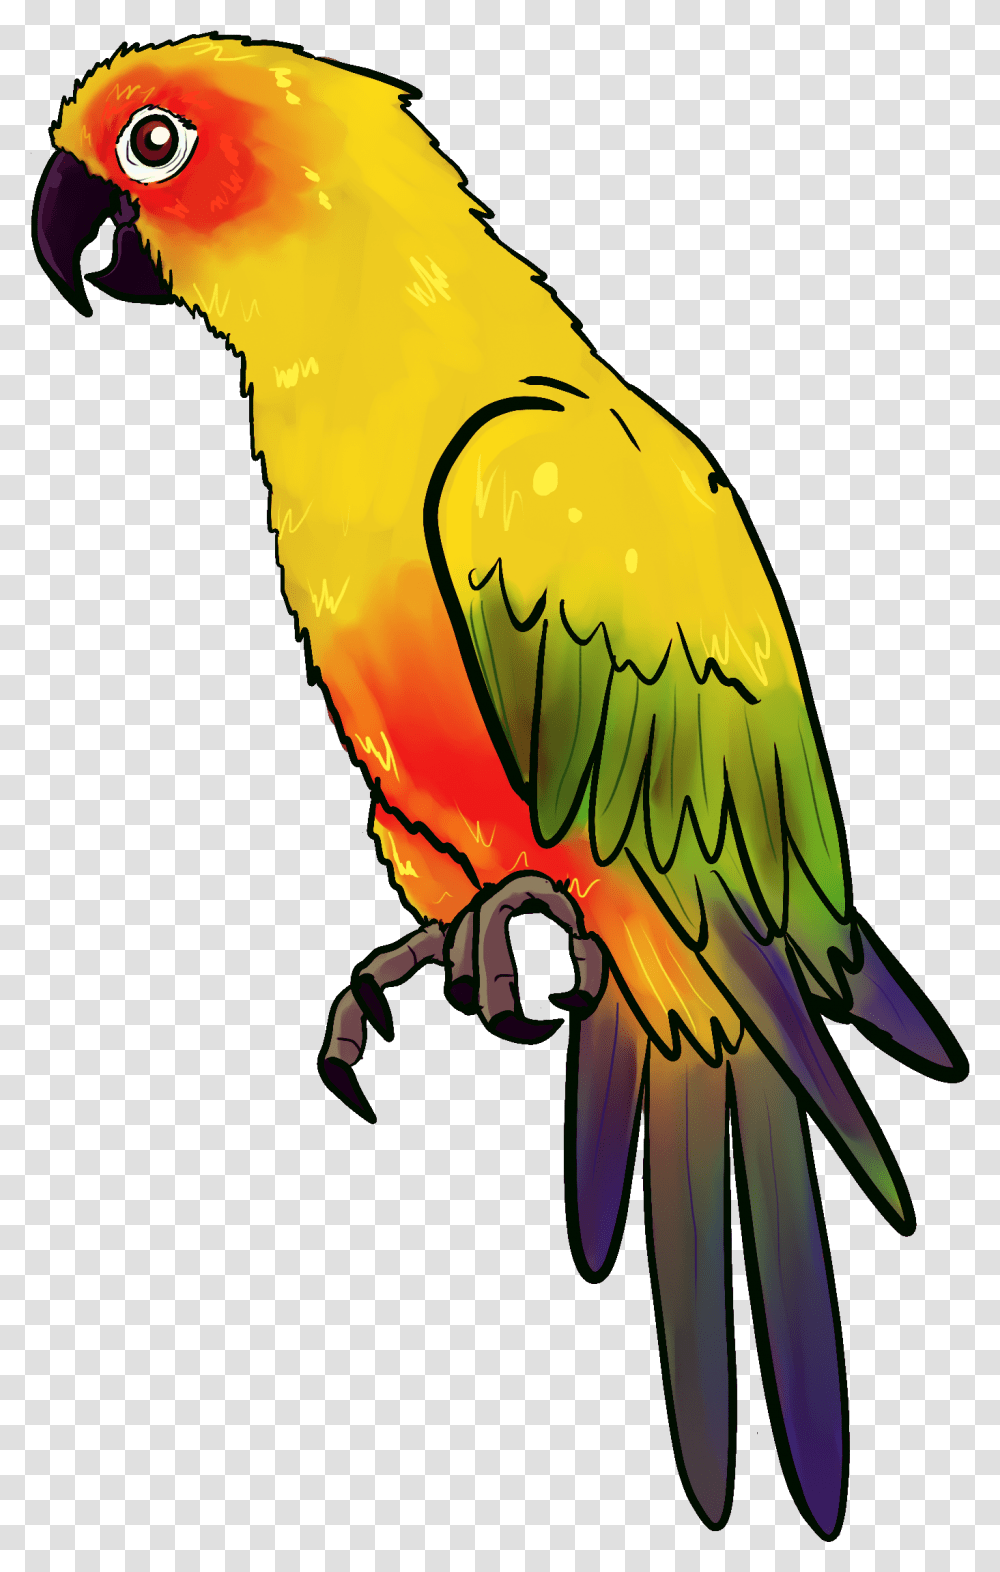 Drawing Of An Yellow Parrot Free Image Parrot Drawing, Macaw, Bird, Animal Transparent Png